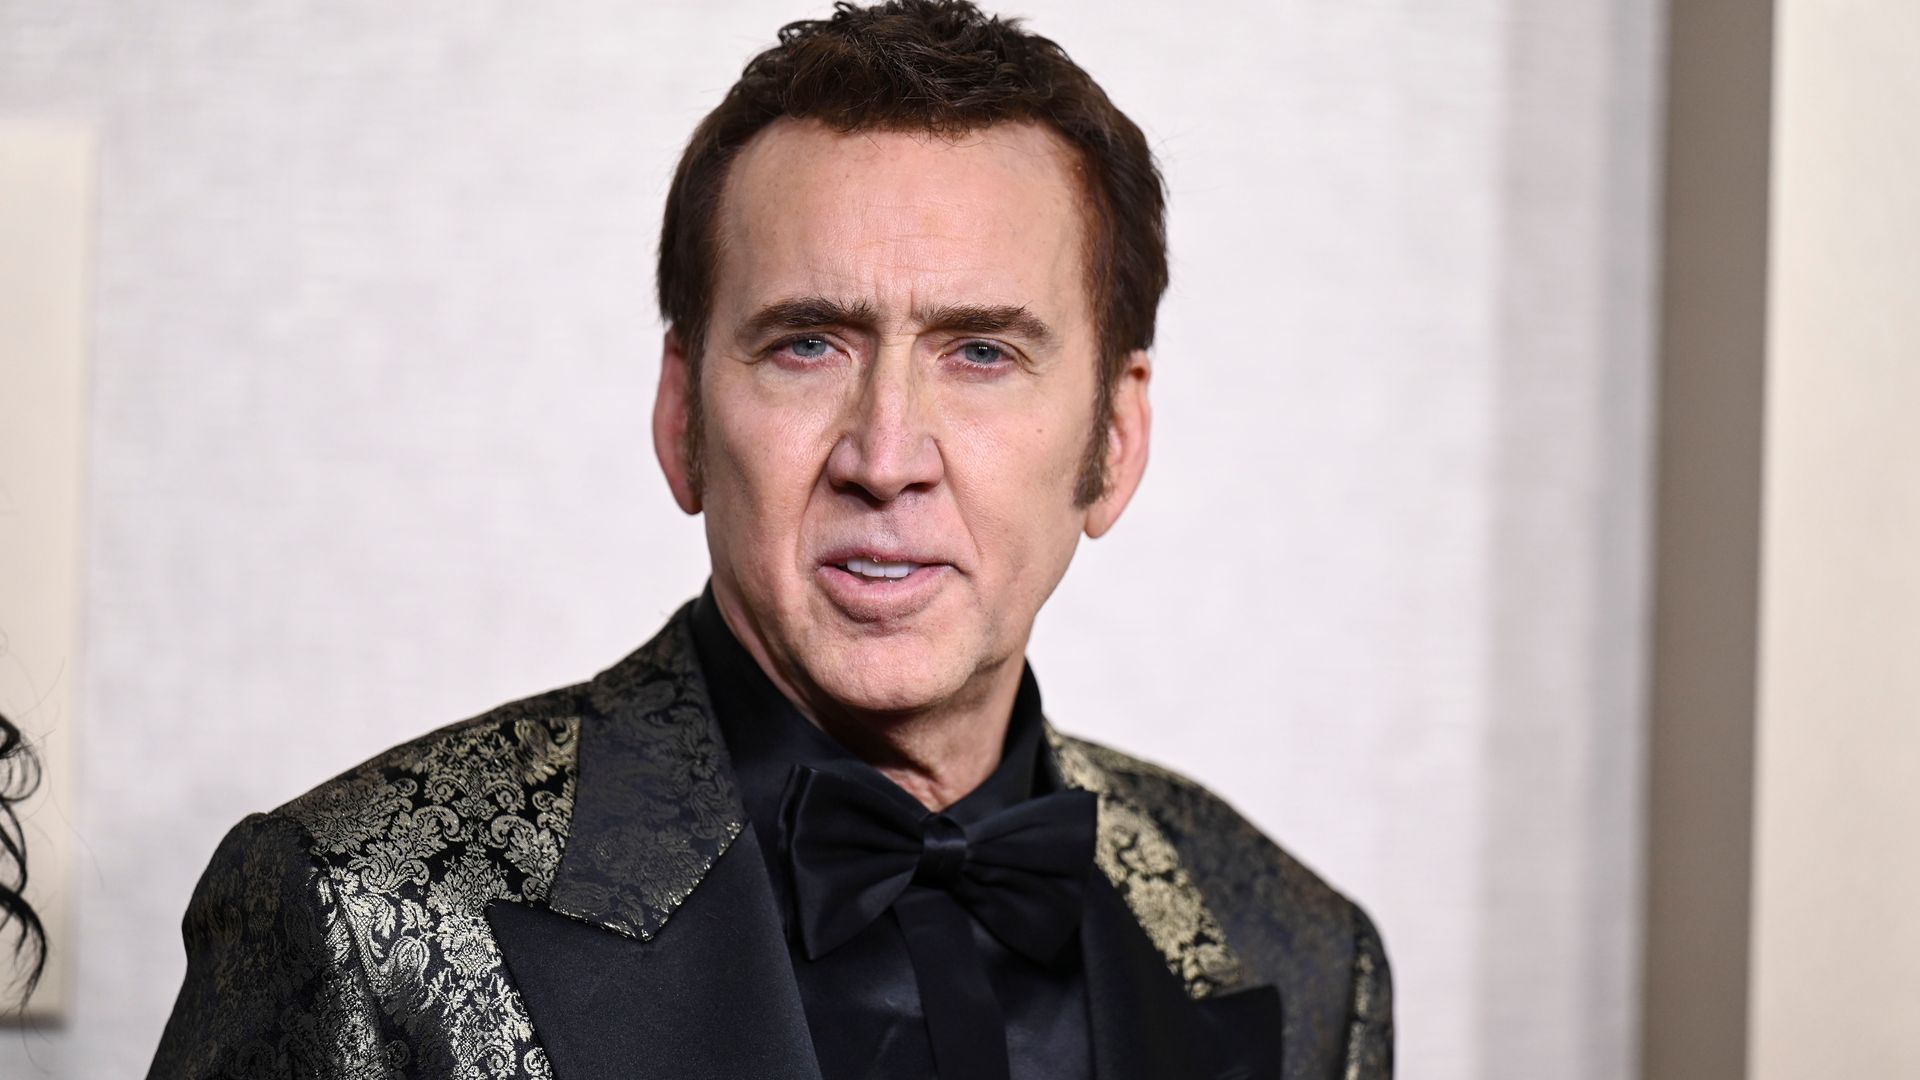 Nicolas Cage leaves fans lost for words as they make discovery about the star after his 60th birthday